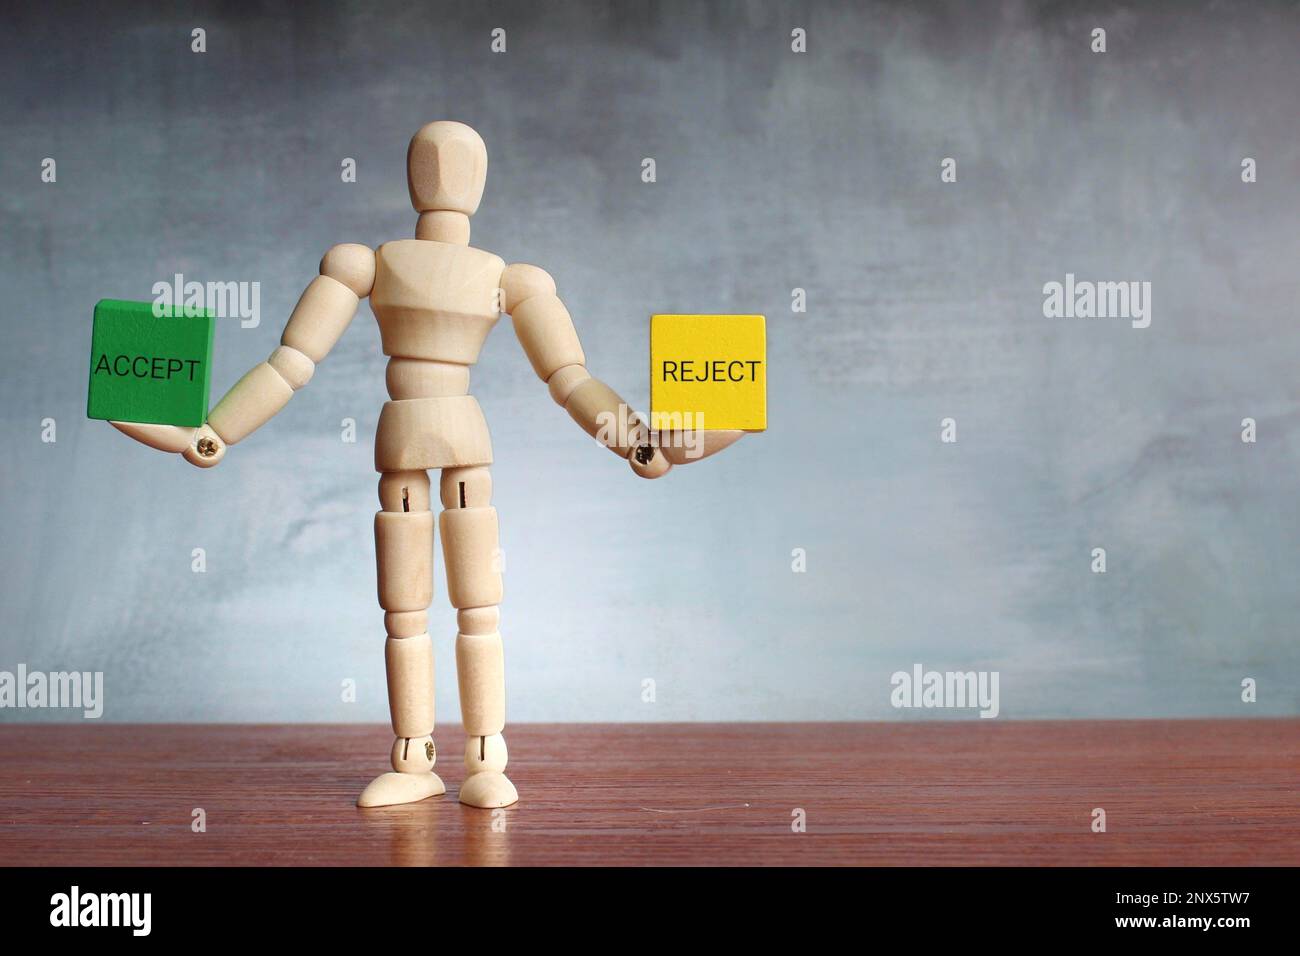 Wooden human figure balancing wooden cubes with text ACCEPT and REJECT. Choice, option, survey concept. Stock Photo